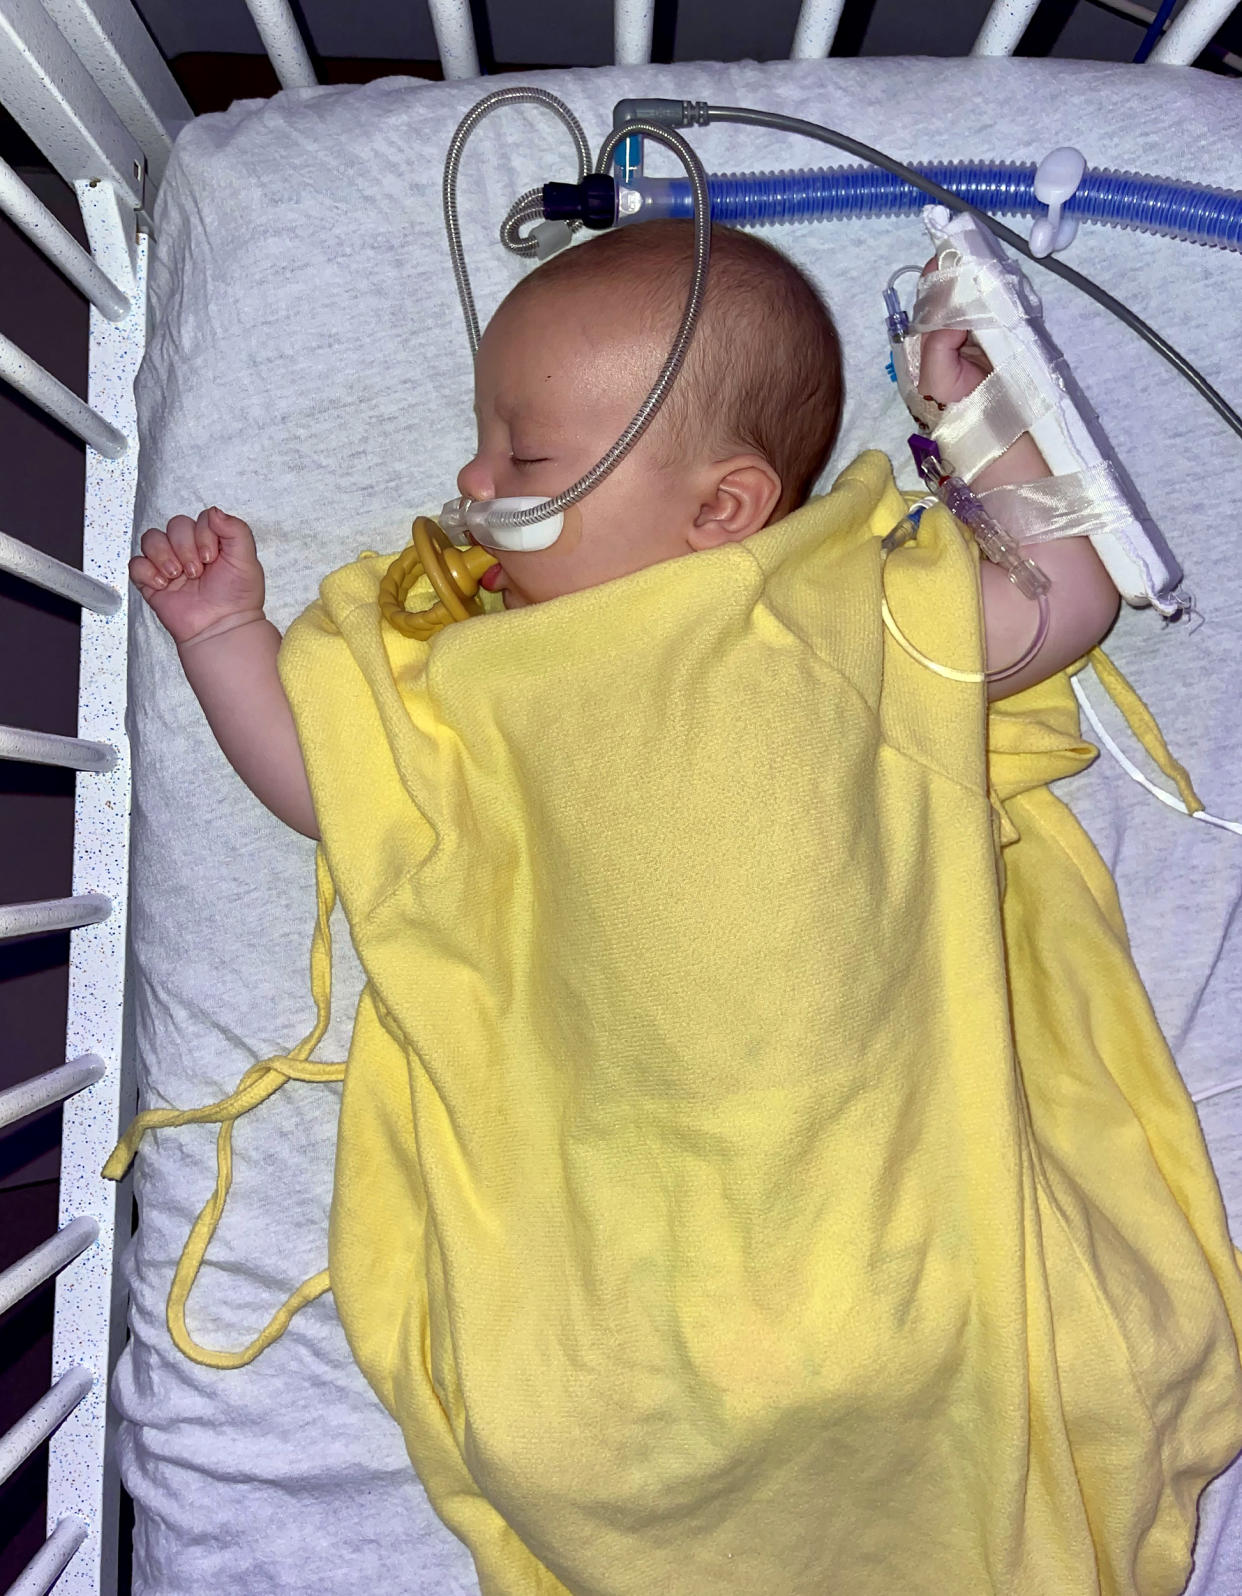 Baby Asa, 2 months, was hospitalized with RSV for four days as children's hospitals around the country face a surge in patients due to the respiratory virus. (Courtesy Shanisty Ireland)